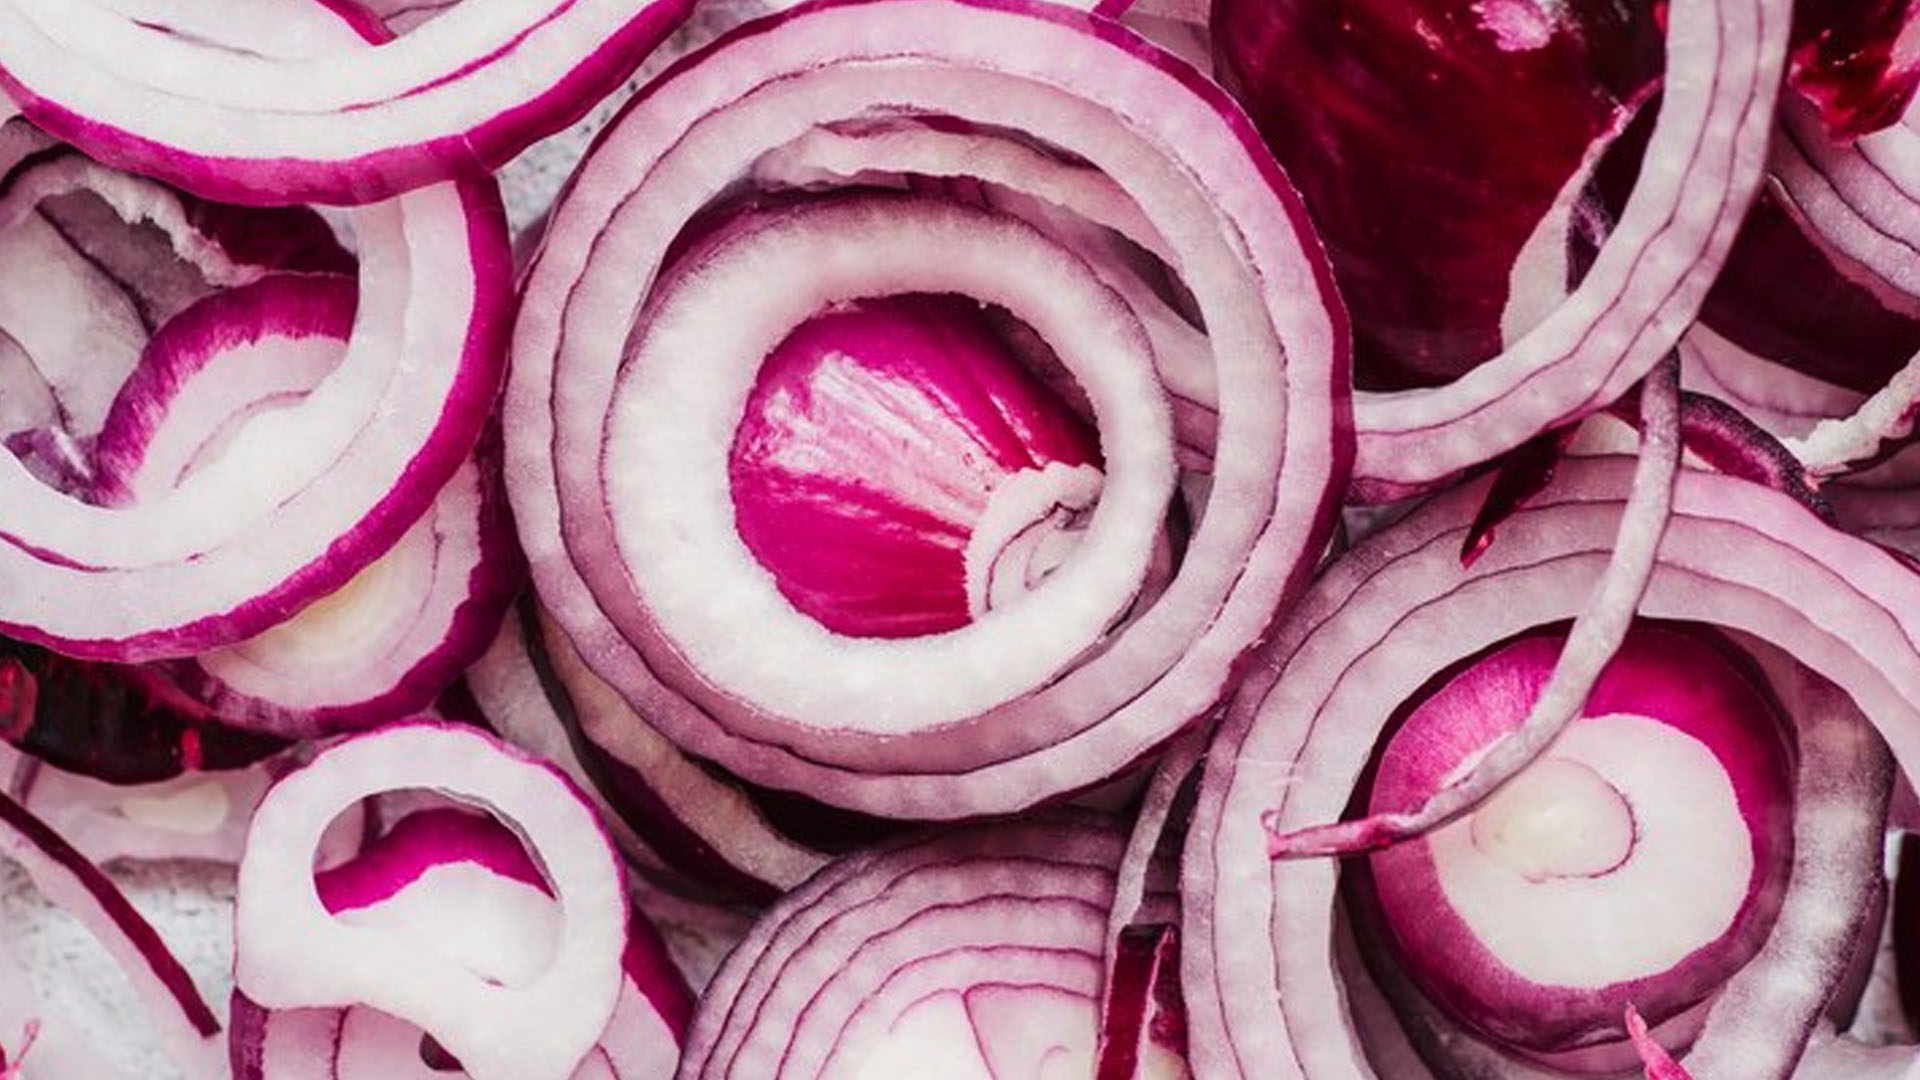 What Are The Health Benefits of Eating Raw Onion?